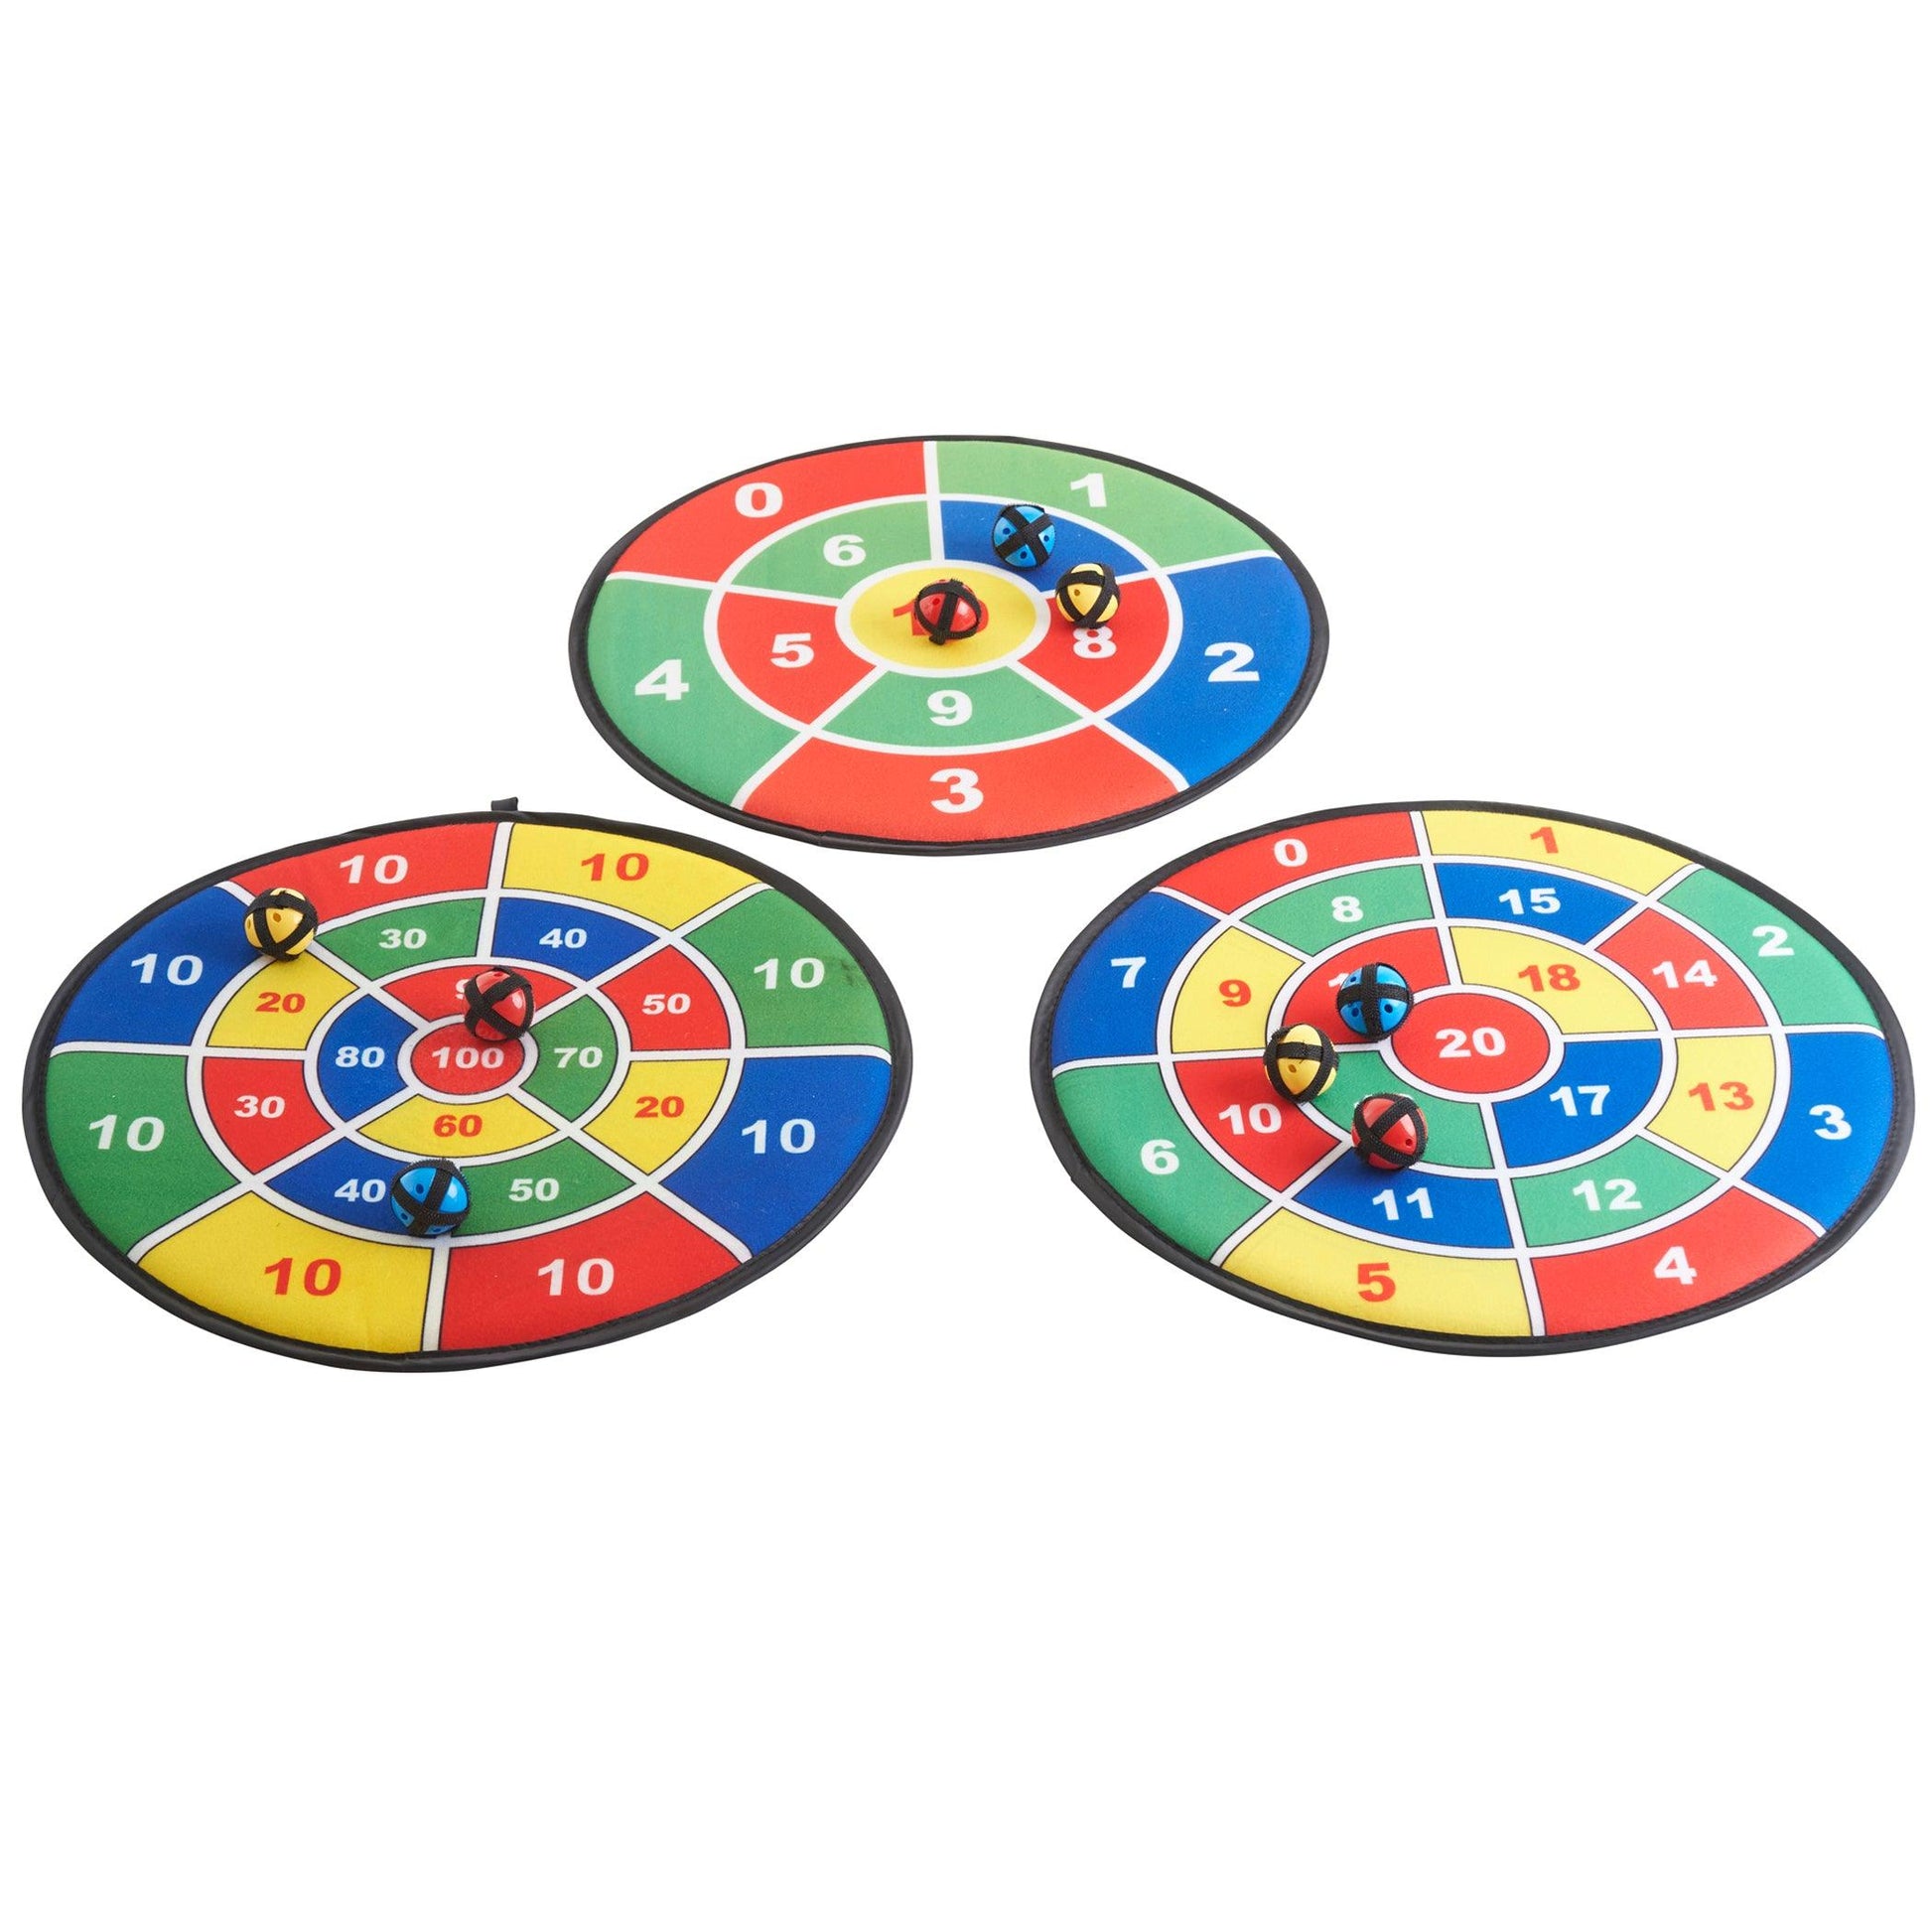 Target Math - 3 Large (17.75") Fabric Dart Boards with 9 Balls Using Hook-and-Loop Fasteners - Loomini